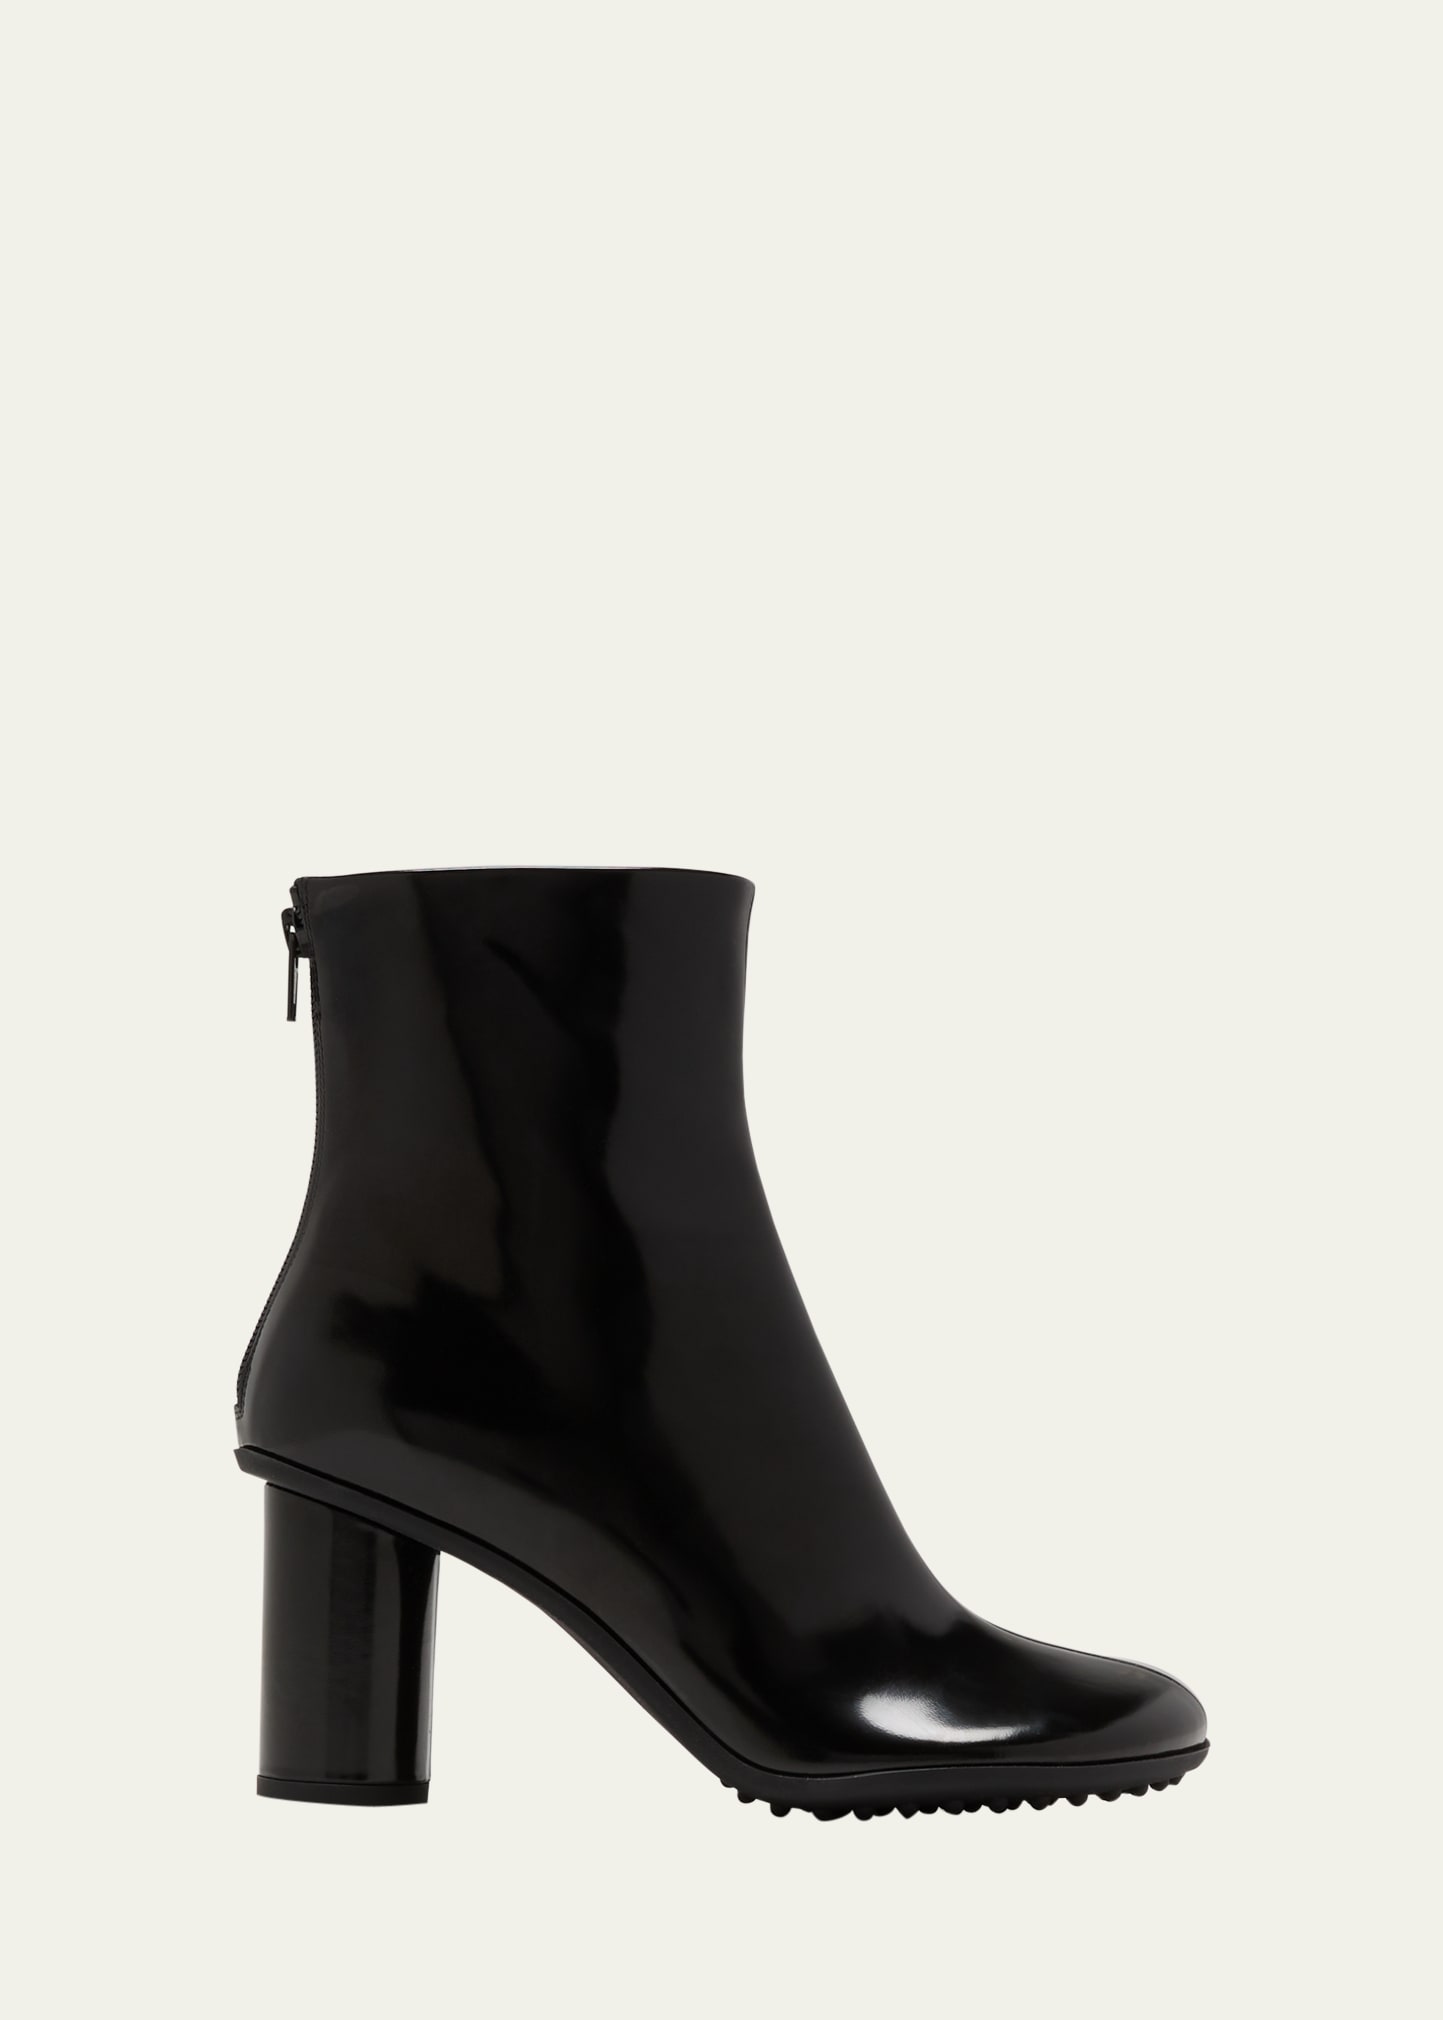 Atomic Leather Cylinder-Heel Ankle Boots